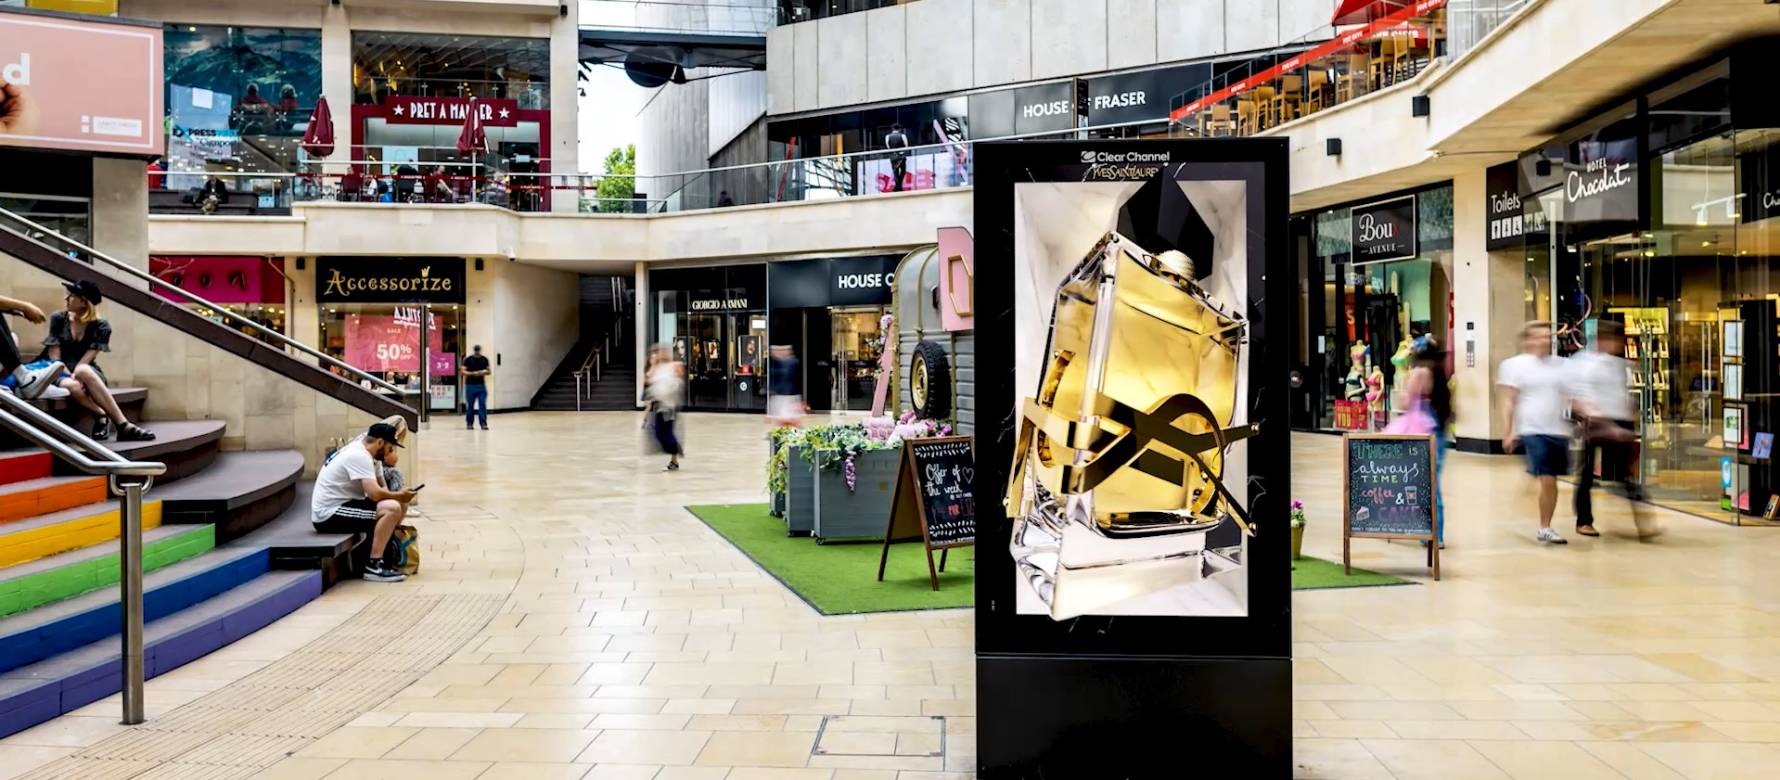 Shopping centre with an Adshel screen displaying a perfume bottle